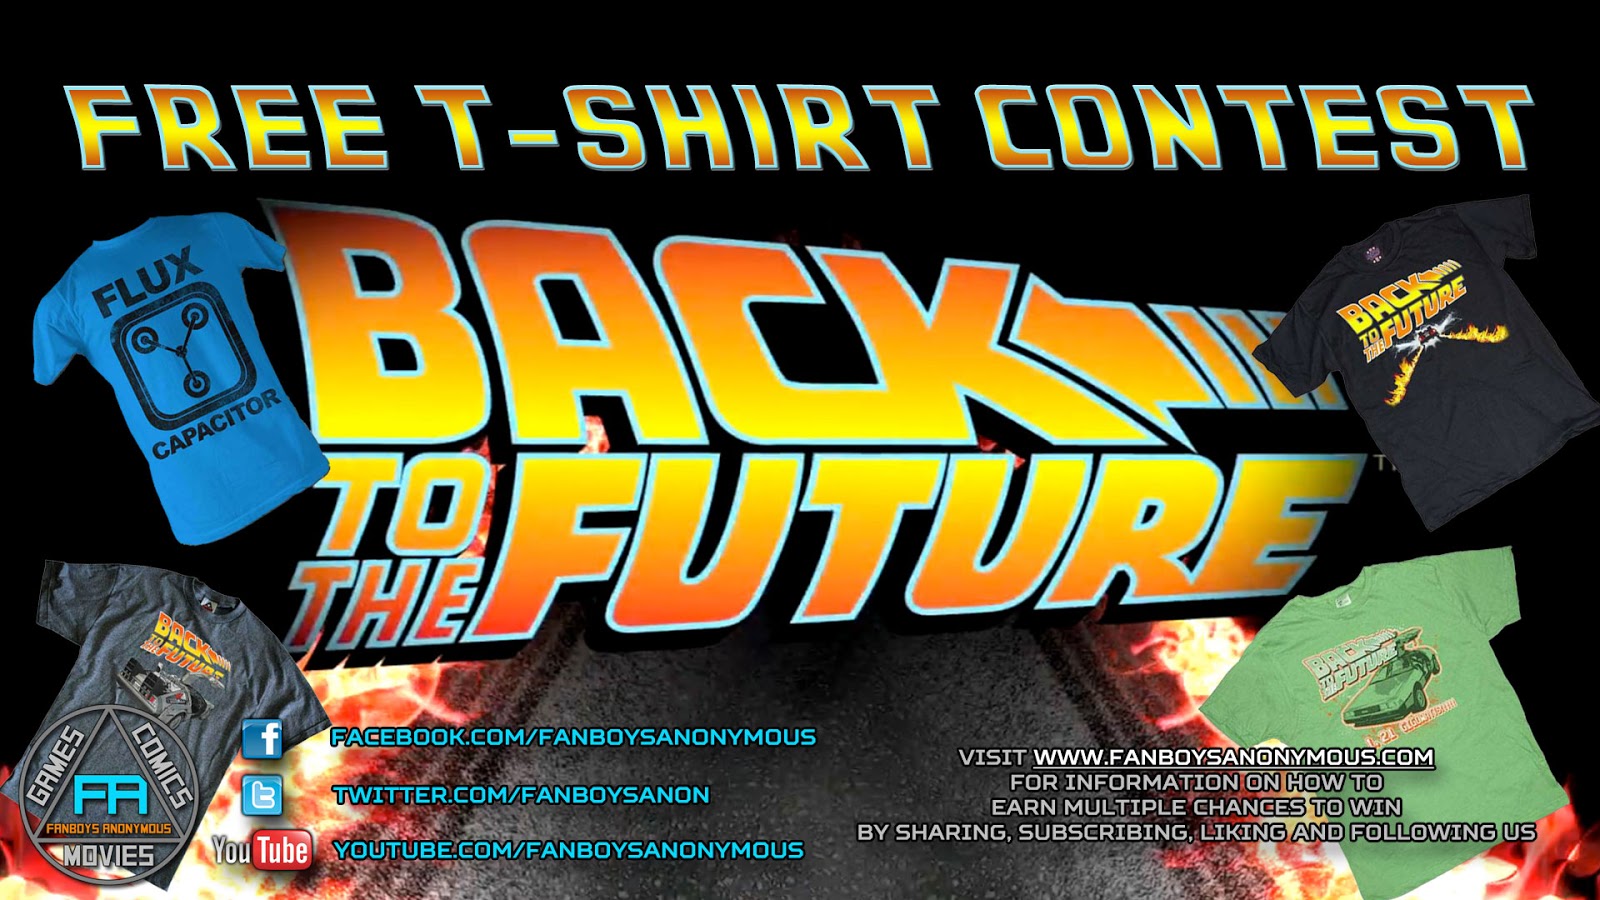 win a free Back to the Future shirt by subscribing to Fanboys Anonymous